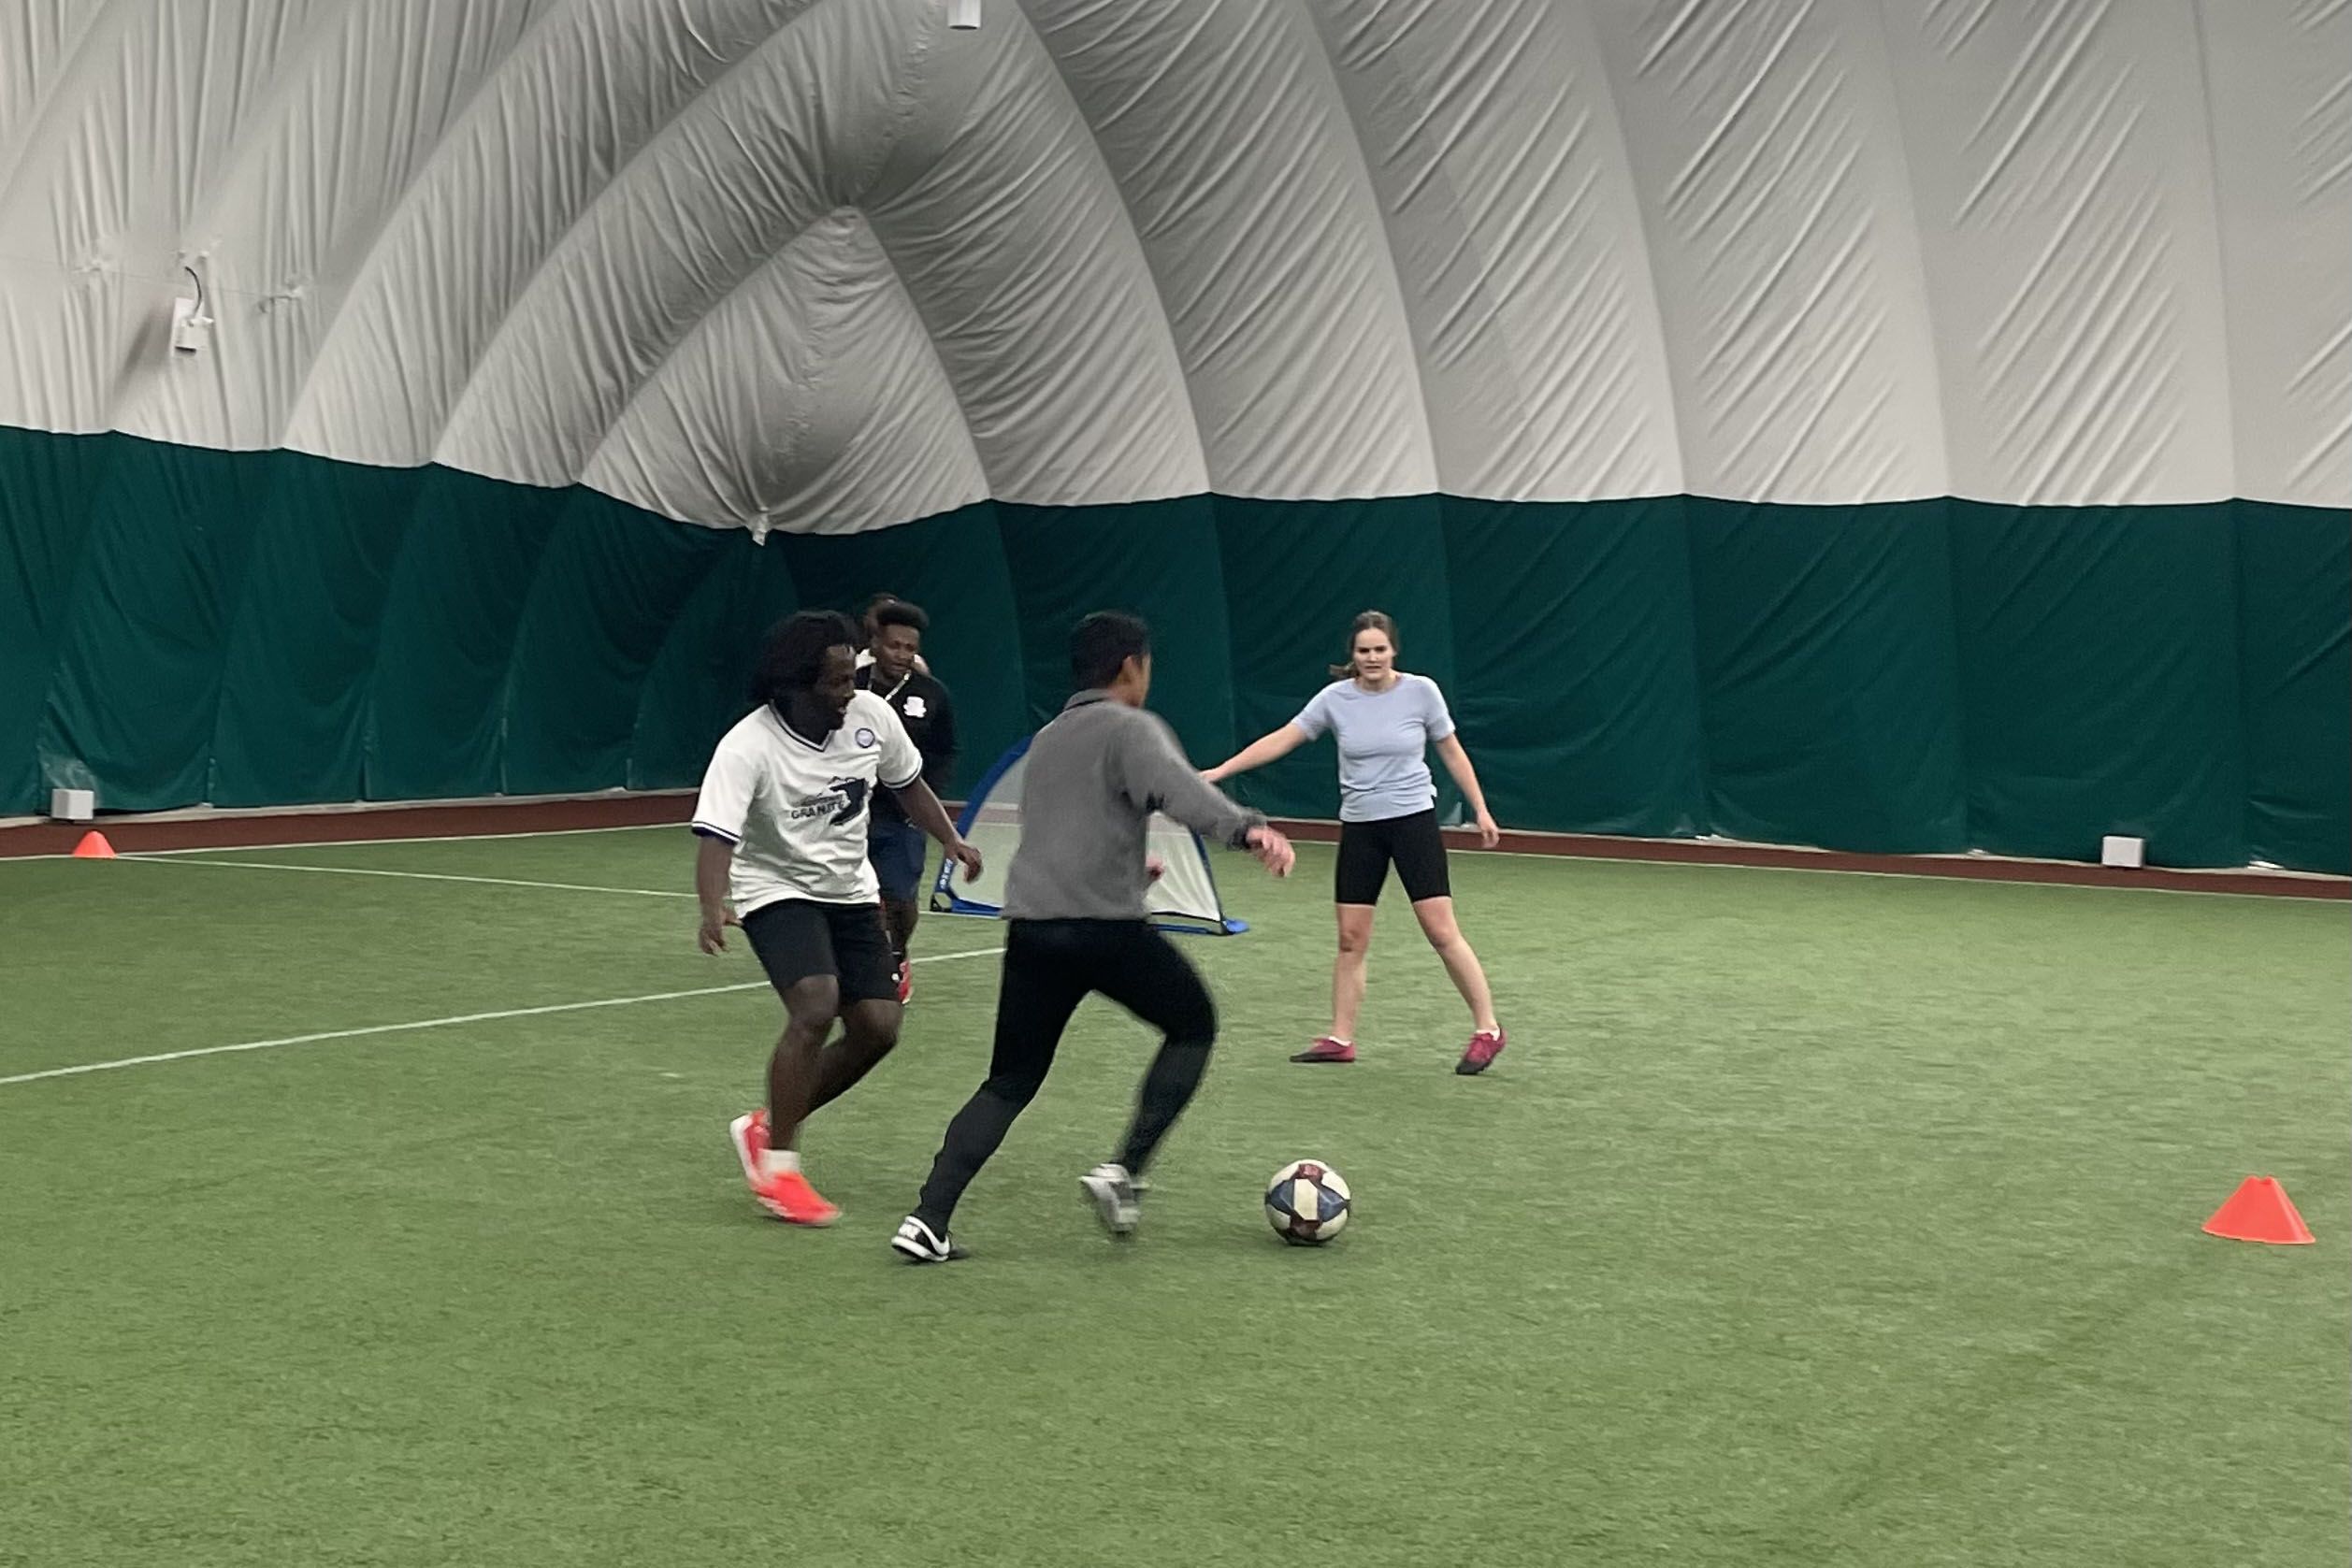 A group of college students playing indoor soccer.